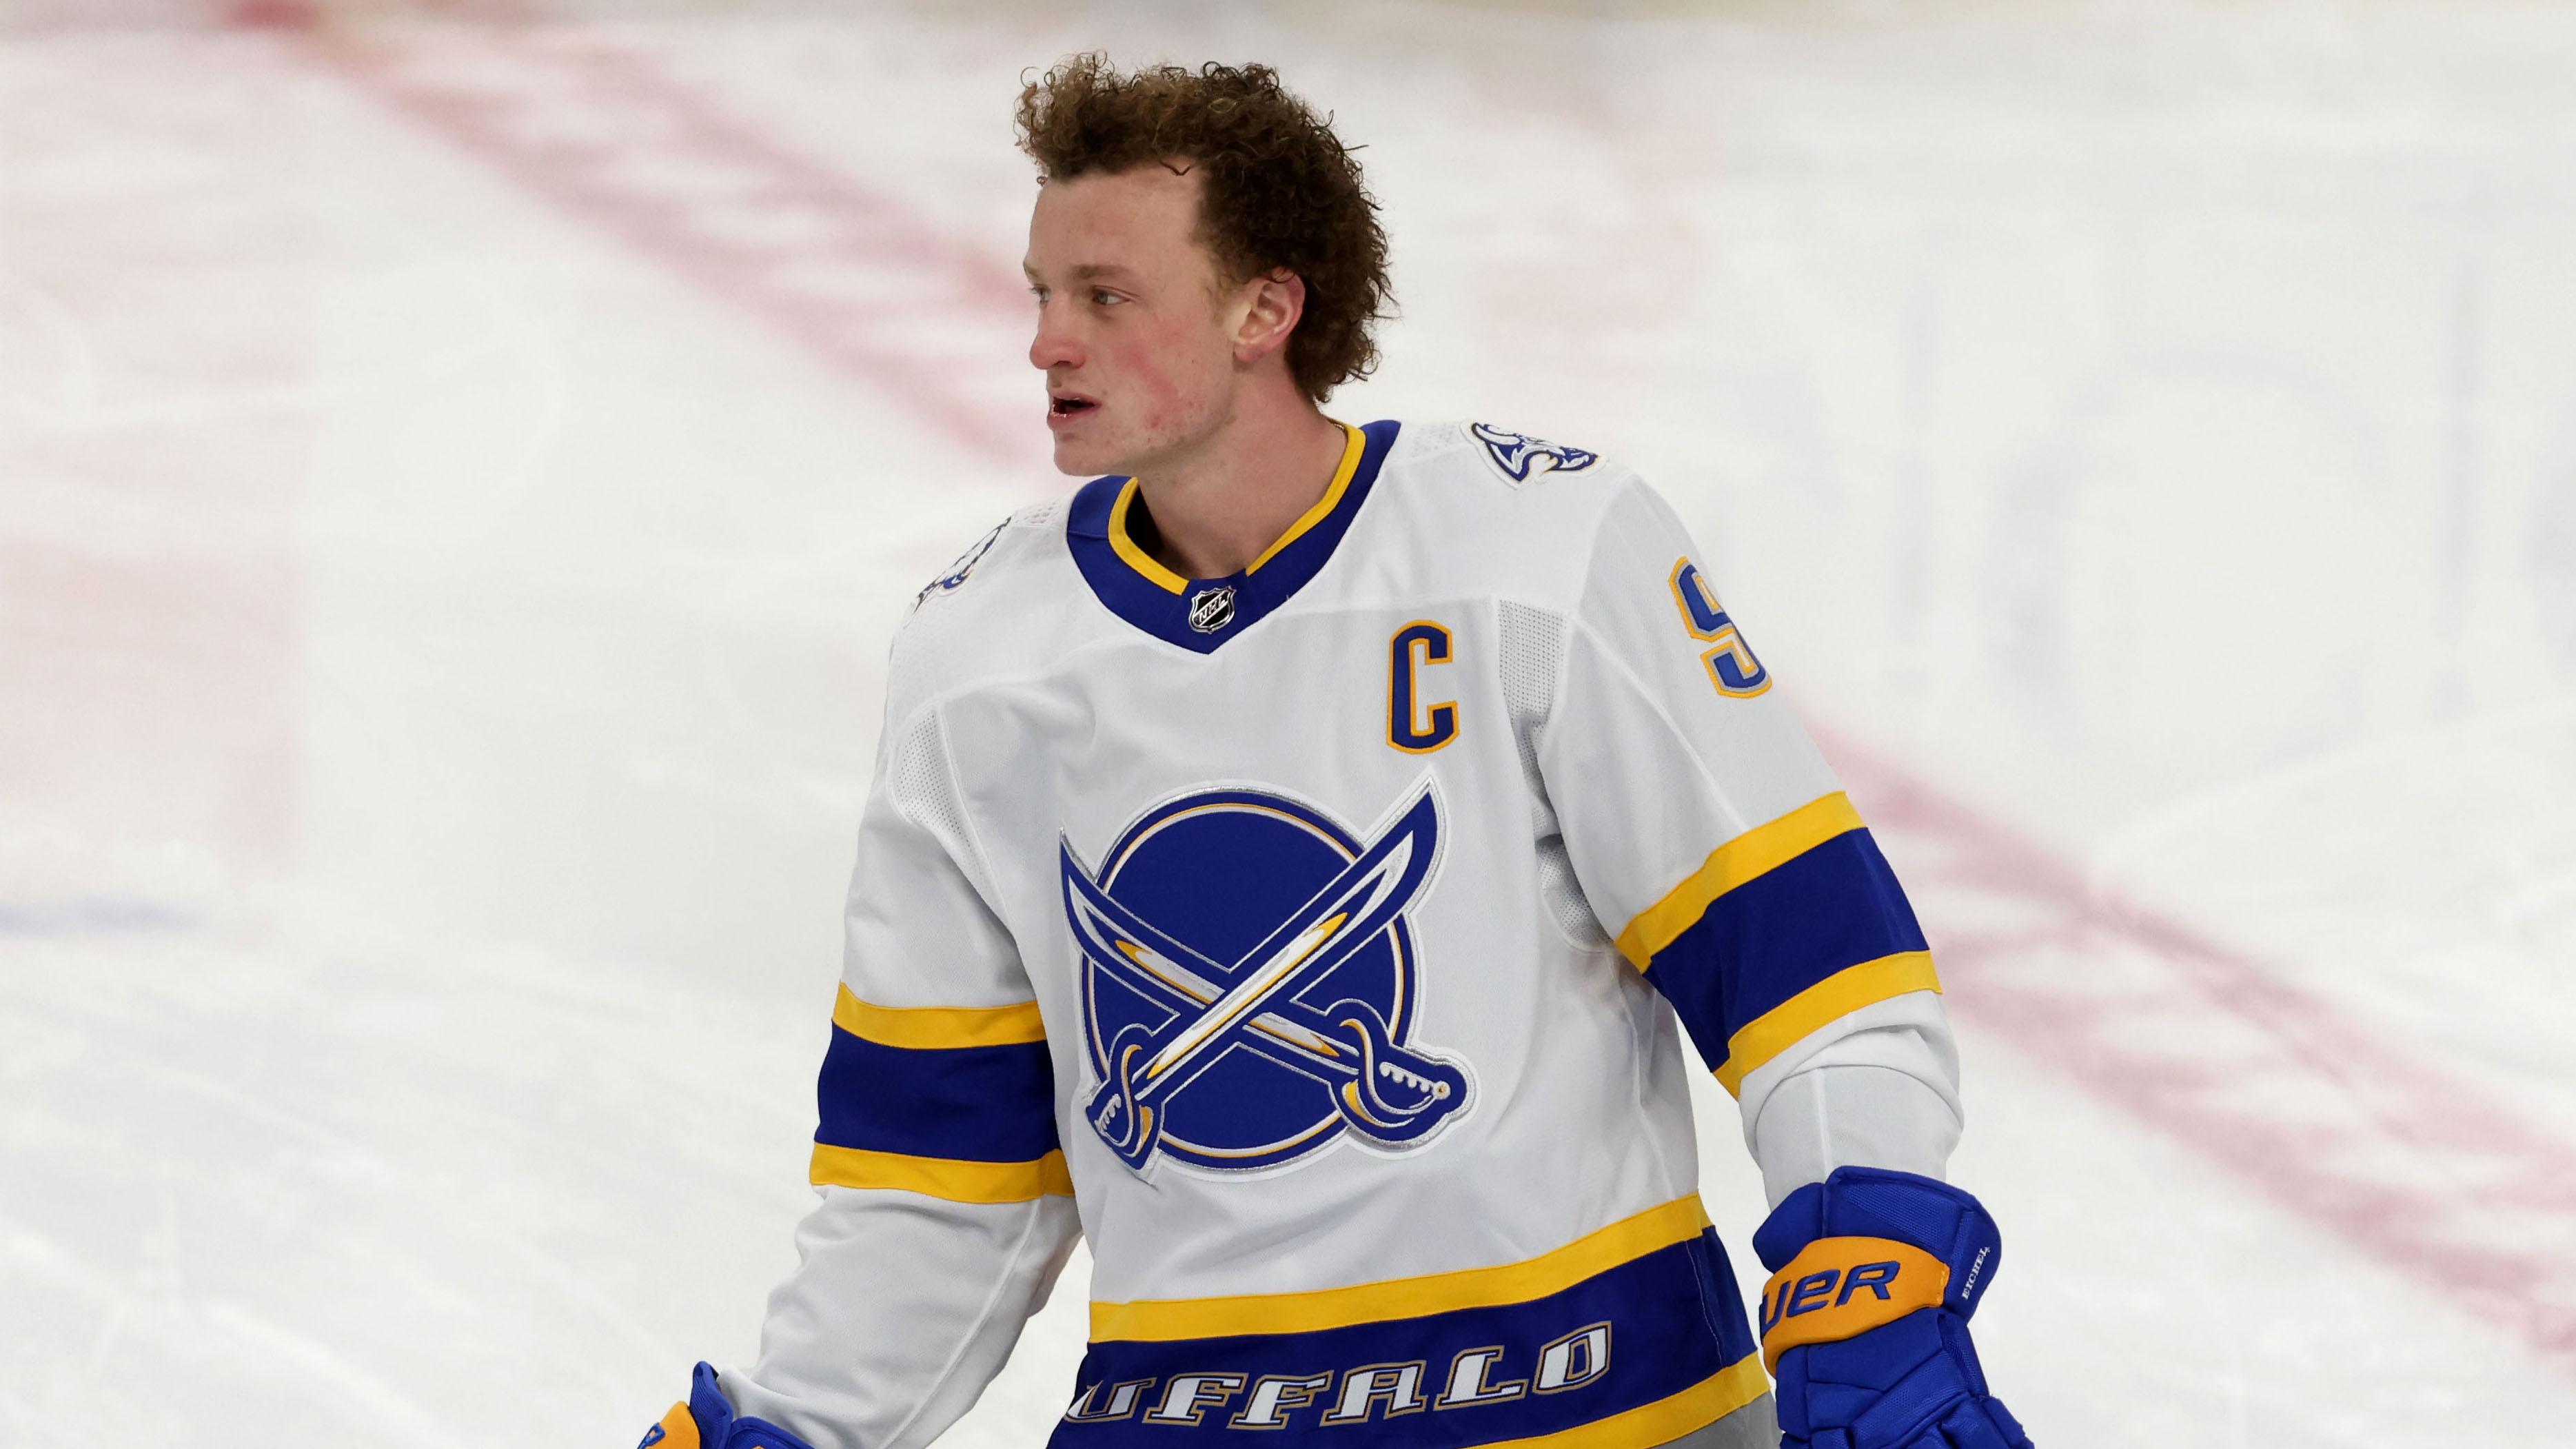 Feb 28, 2021; Buffalo, New York, USA; Buffalo Sabres center Jack Eichel (9) on the ice for warmups before a game against the Philadelphia Flyers at KeyBank Center. / Mandatory Credit: Timothy T. Ludwig-USA TODAY Sports